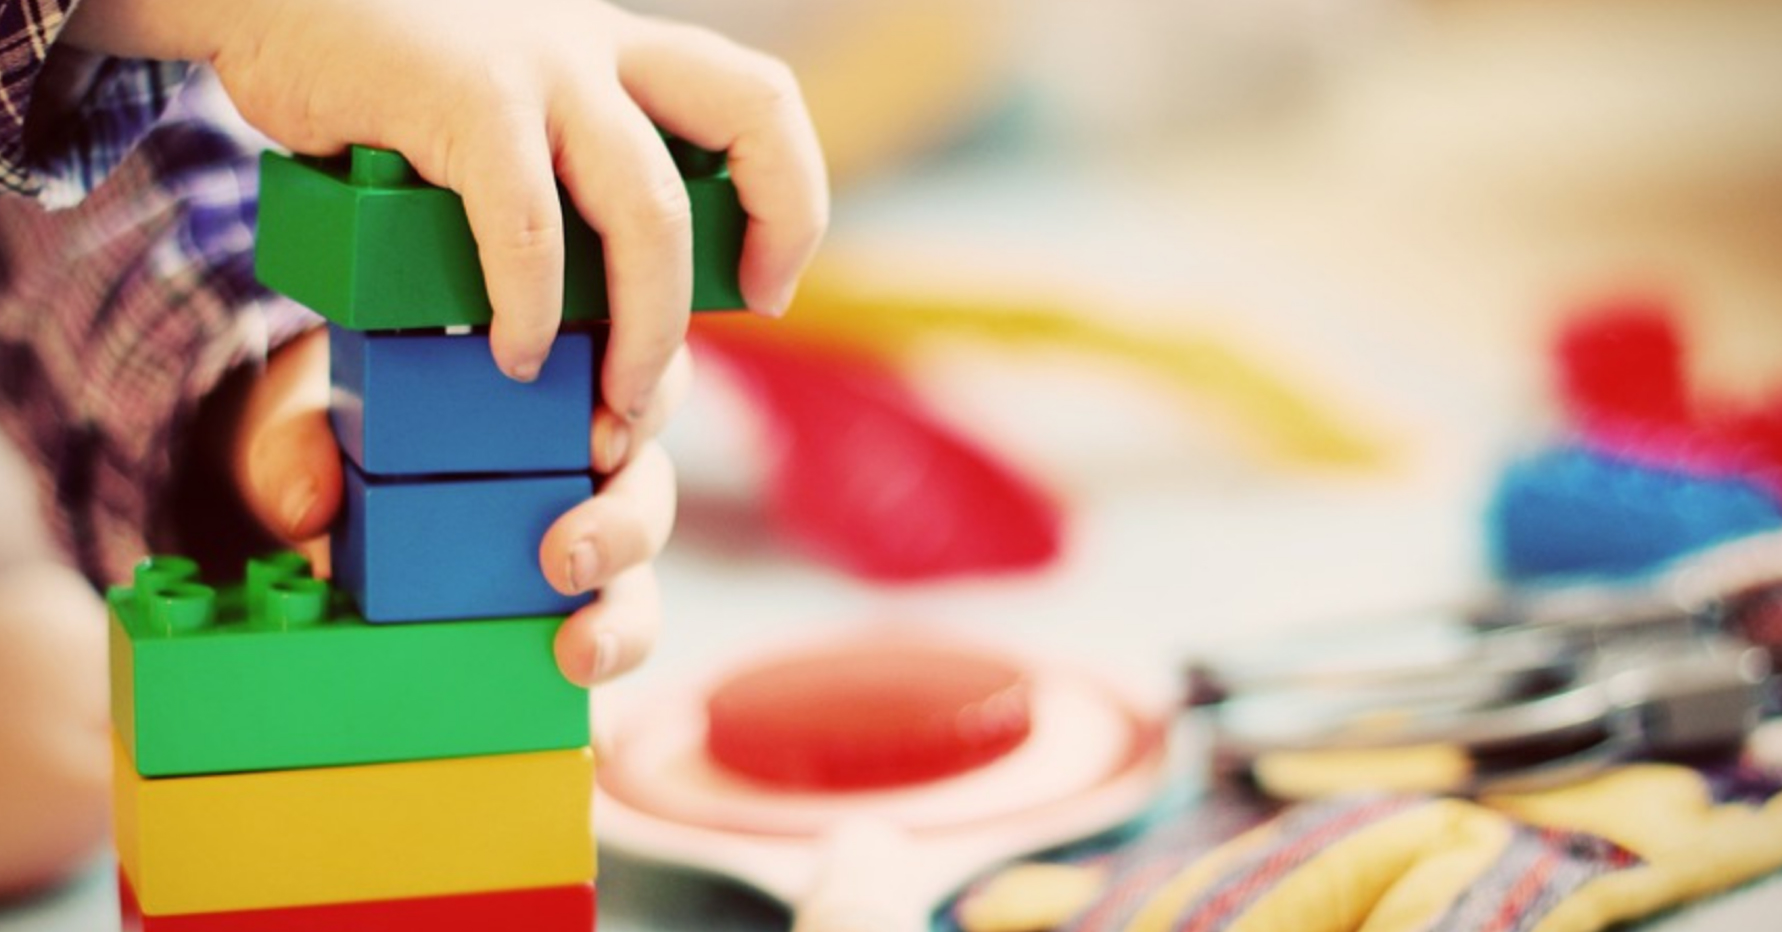 A child's hands building with Lego blocks